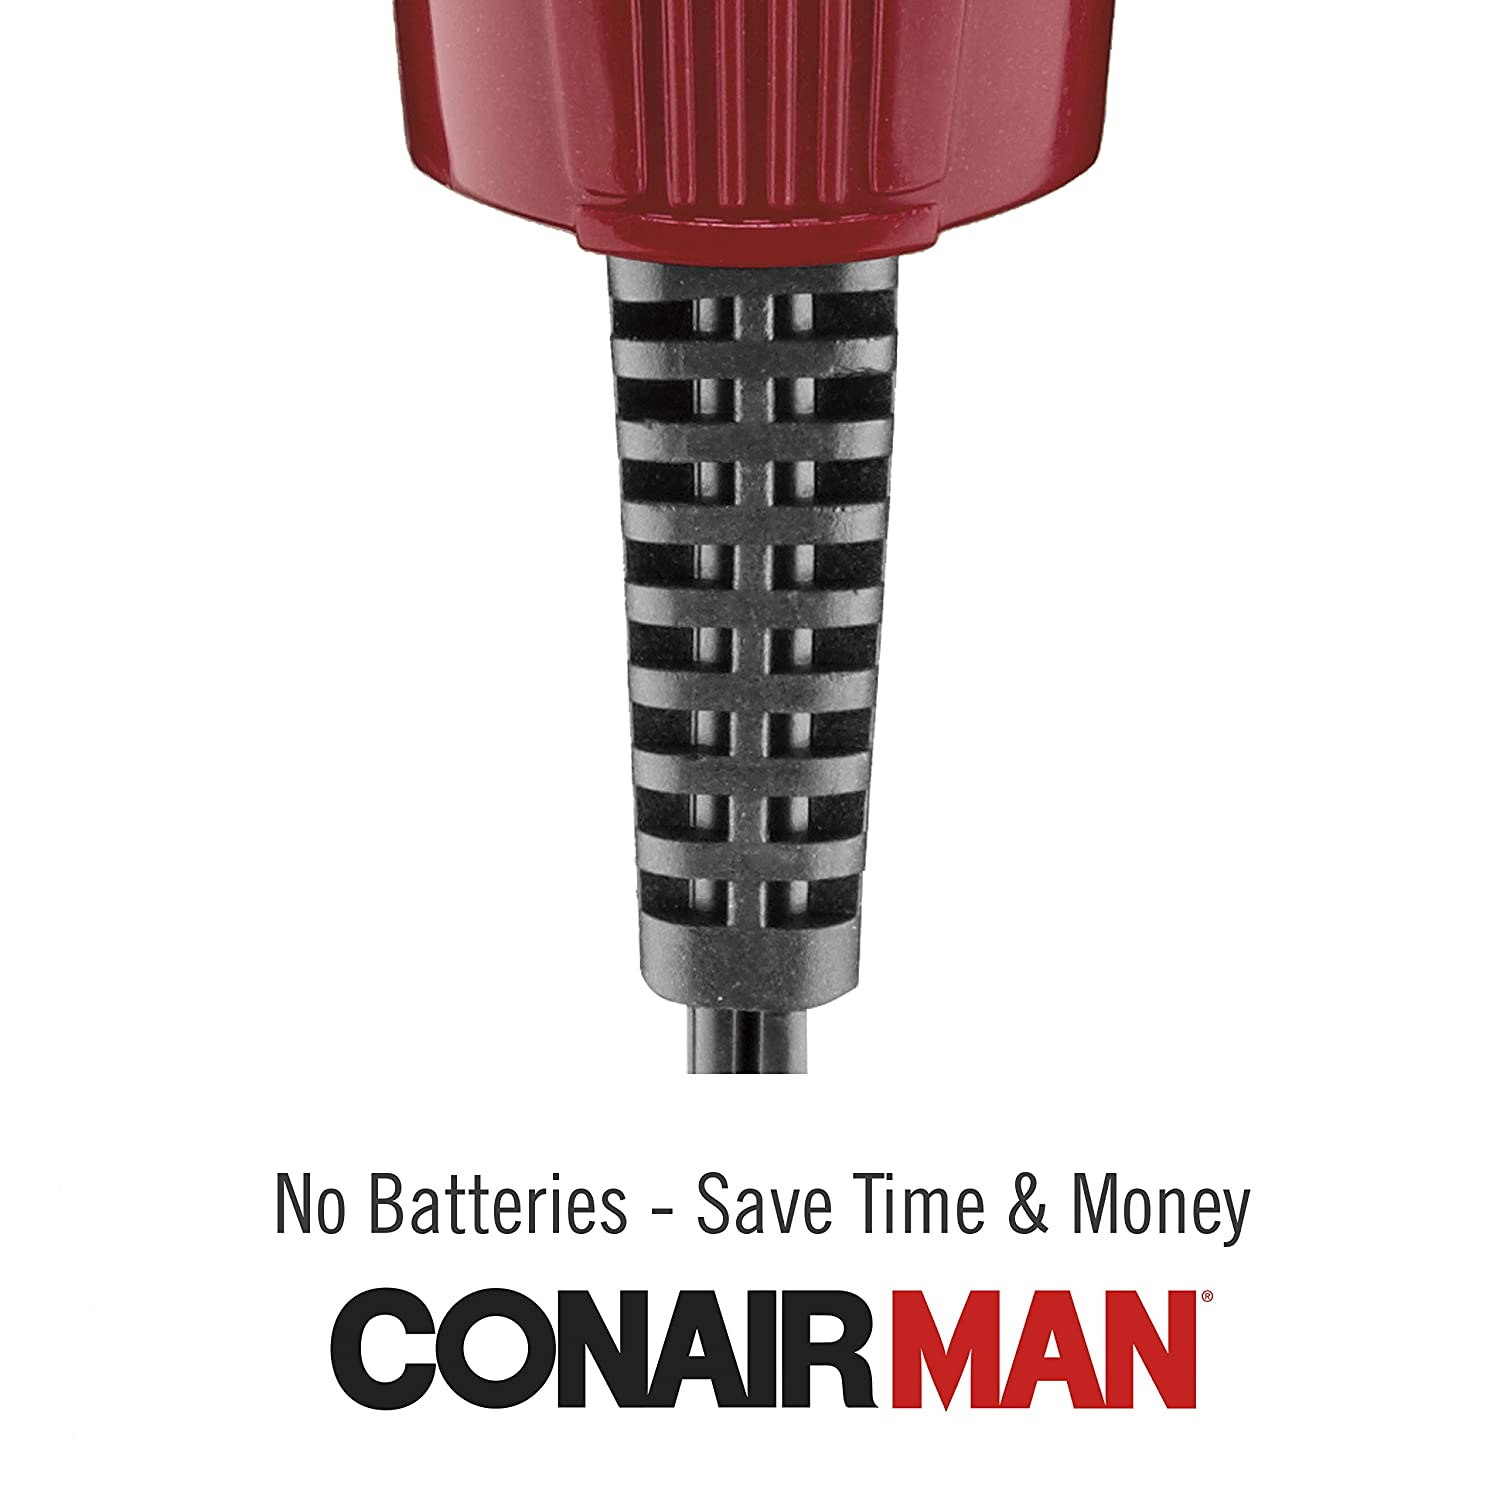 ConairMAN Corded Beard & Mustache Trimmer GMT8NCS - image 5 of 8